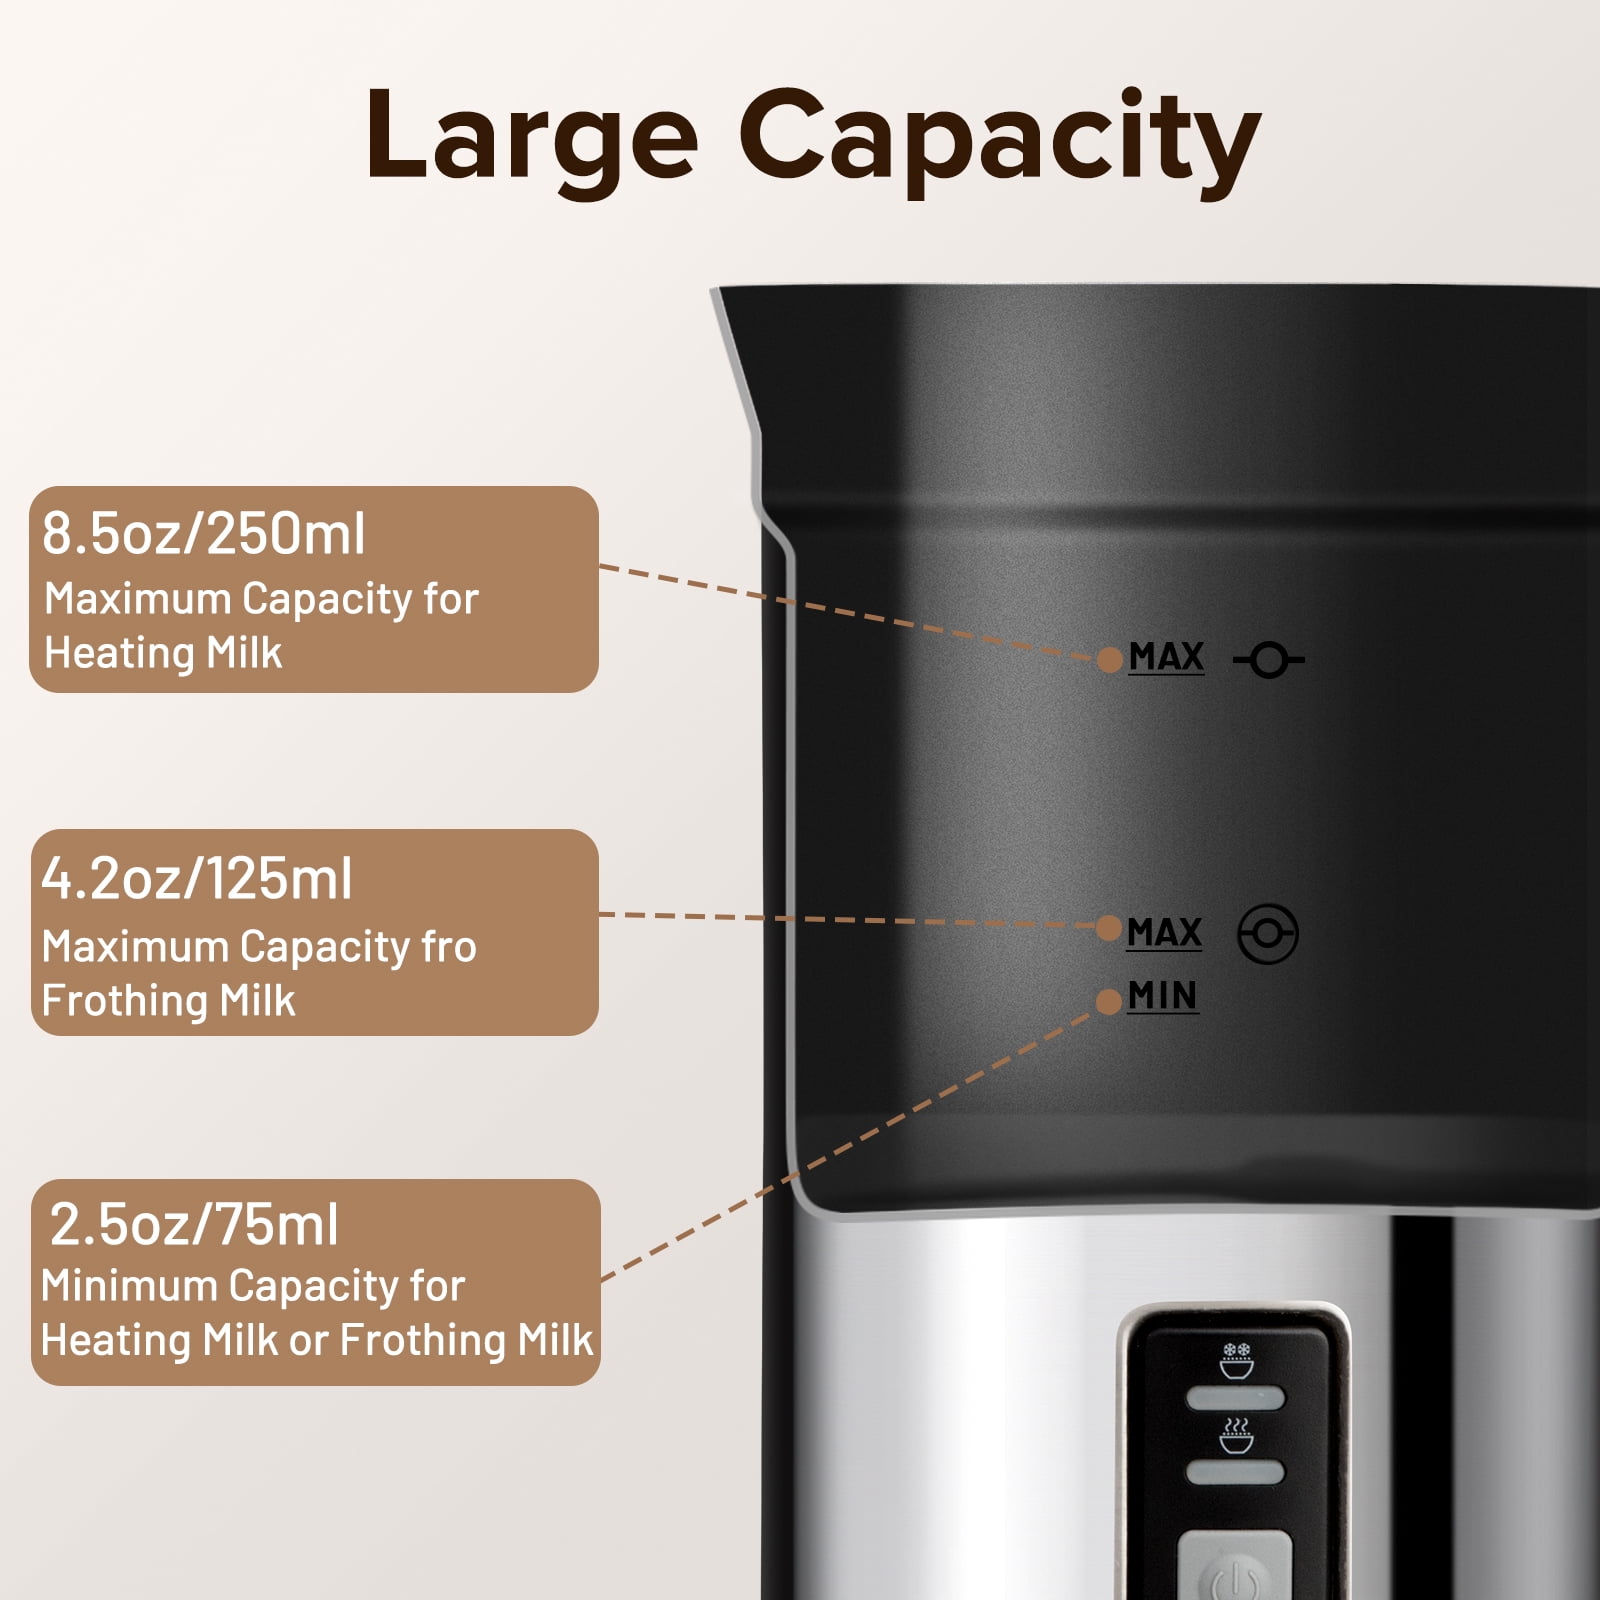 Secura Electric Milk Frother, Automatic Milk Steamer, 4-IN-1 Hot & Cold  Foam Maker-8.4oz/240ml Milk Warmer for Latte, Cappuccinos, Macchiato with  Silicone Spatula, Silent Working & Automatic off 